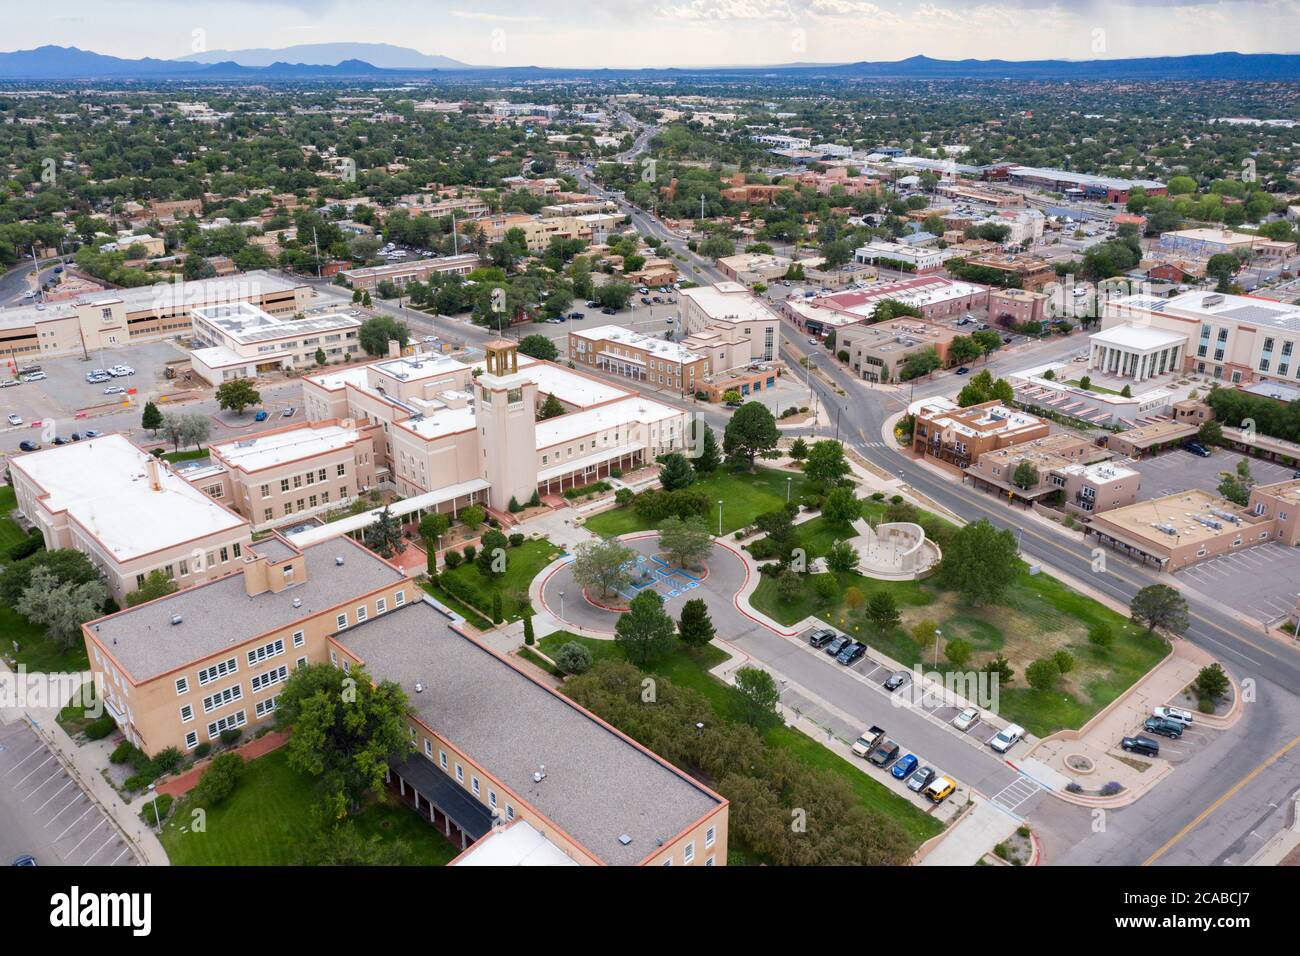 Aerial view of the old state capitol building in Santa Fe, New Mexico Stock Photo